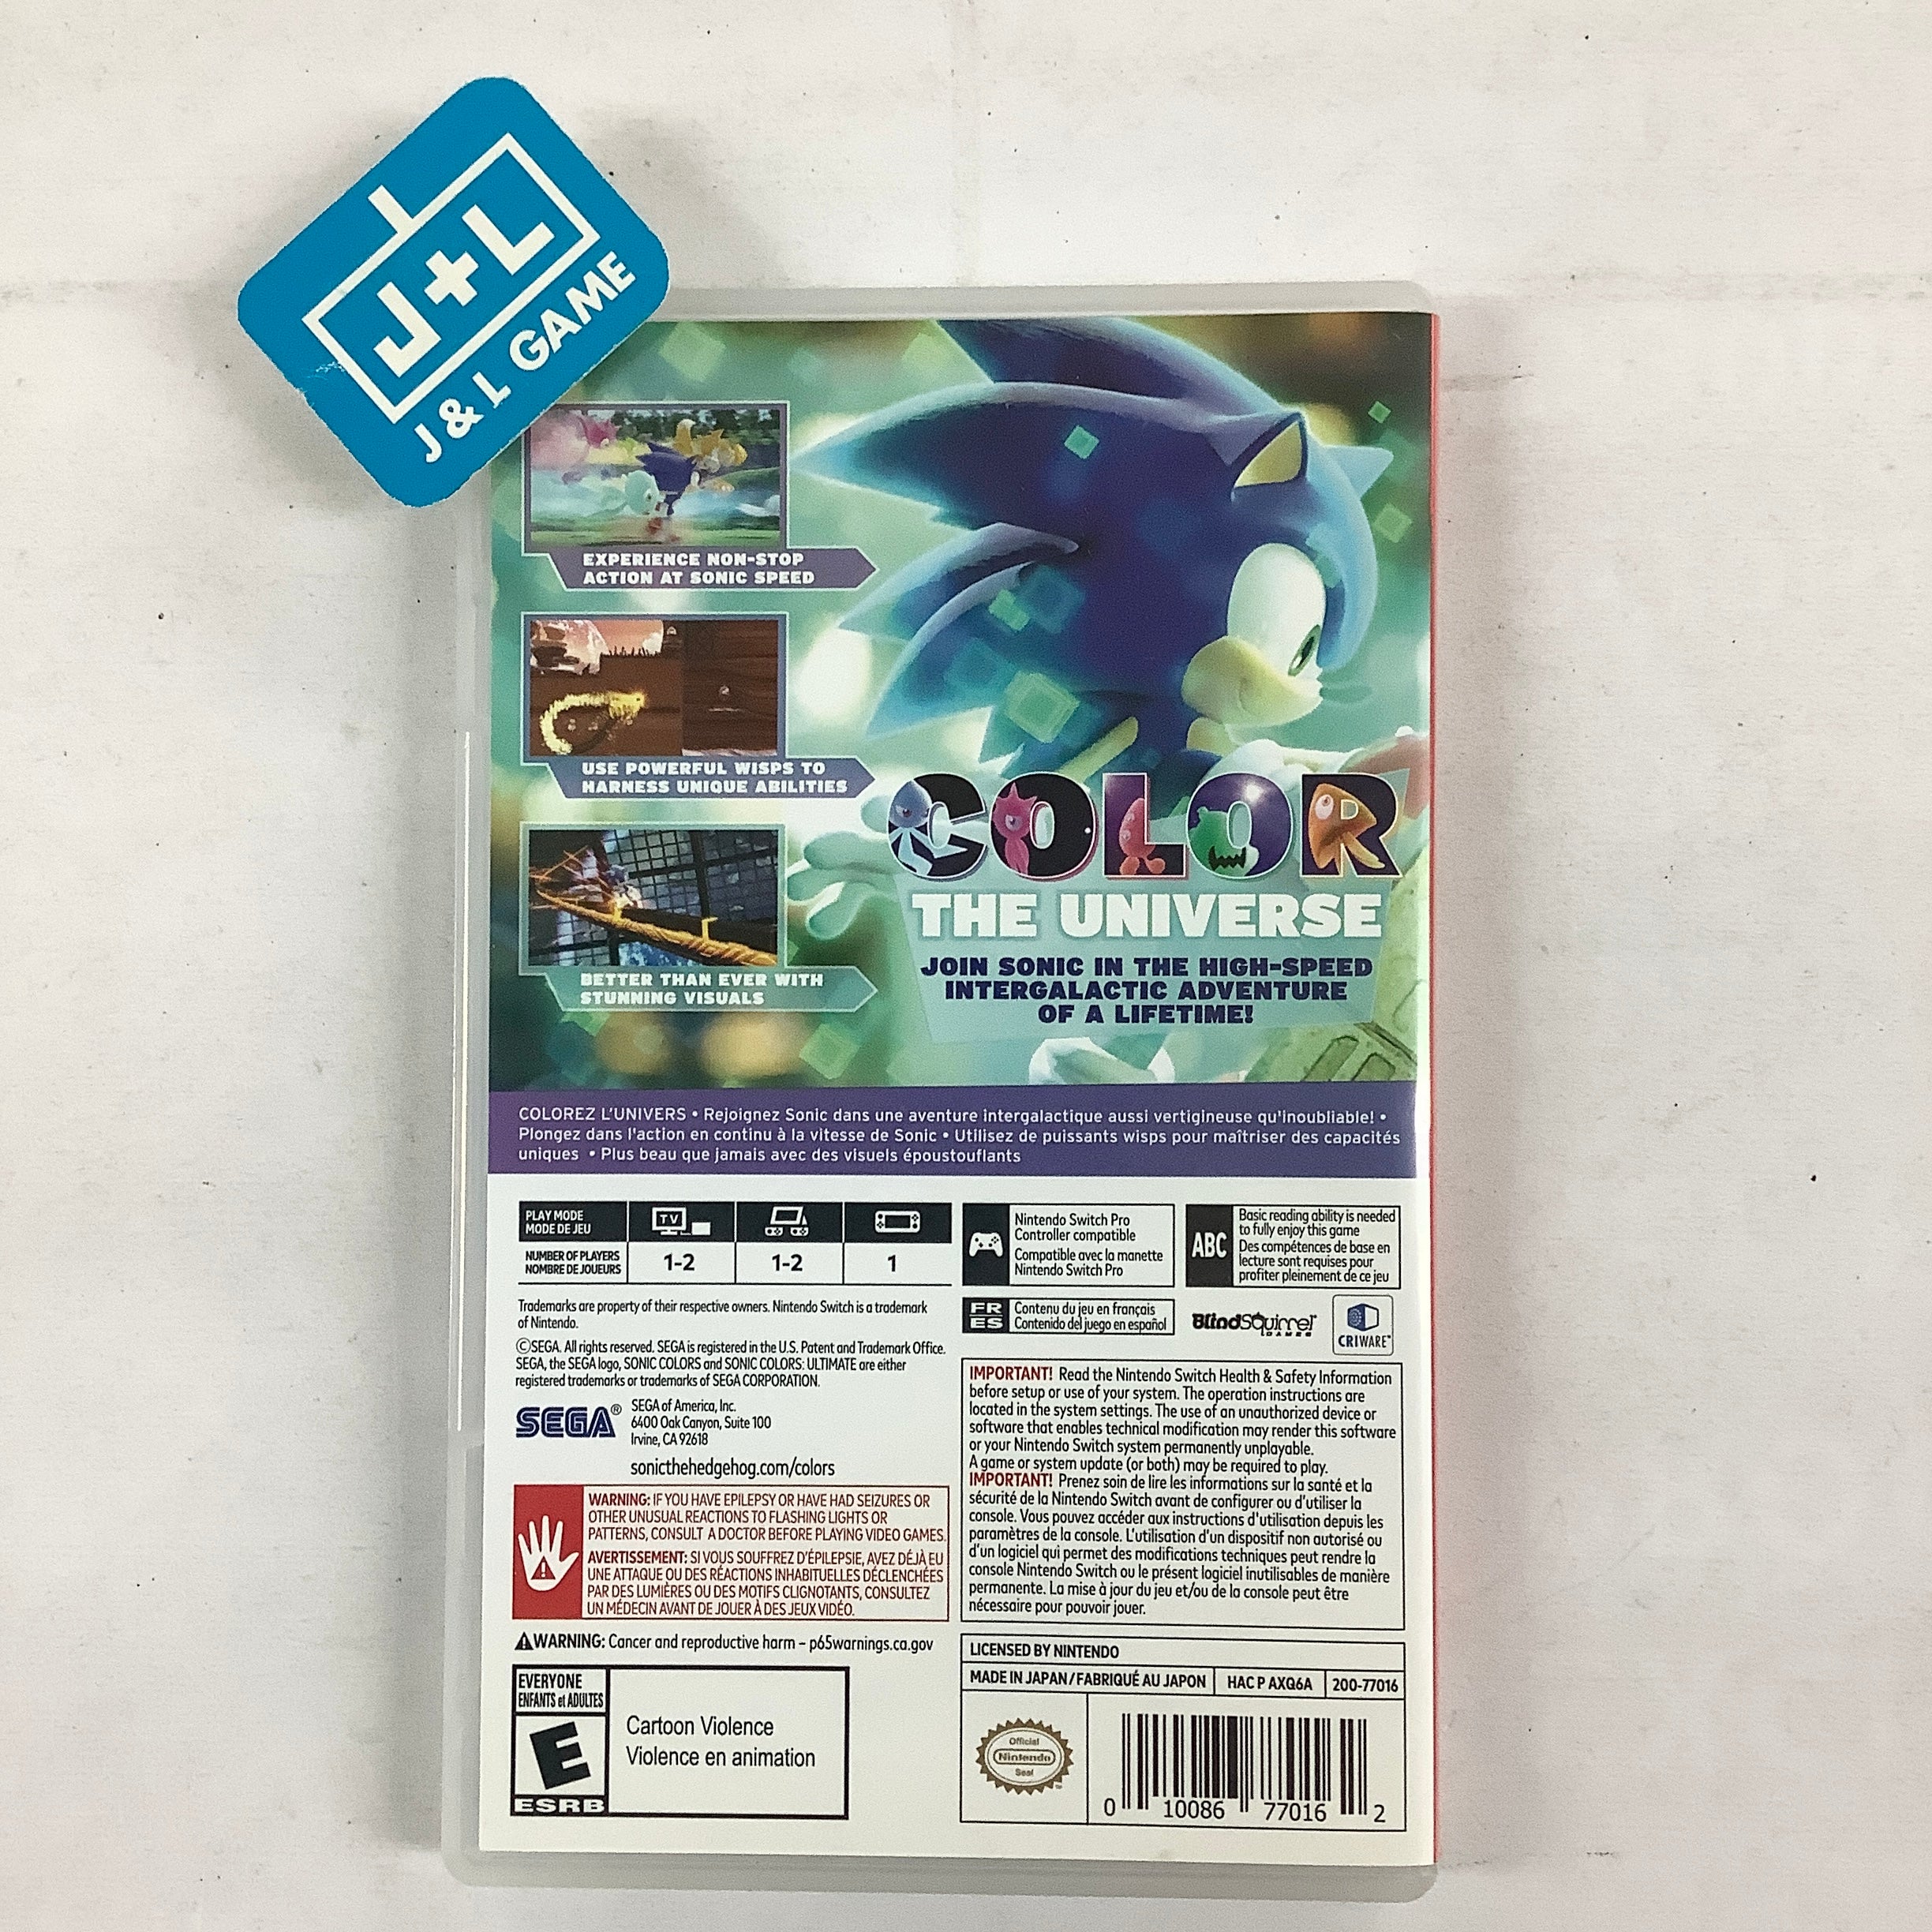 Sonic Colors: Ultimate - (NSW) Nintendo Switch [Pre-Owned] Video Games SEGA   